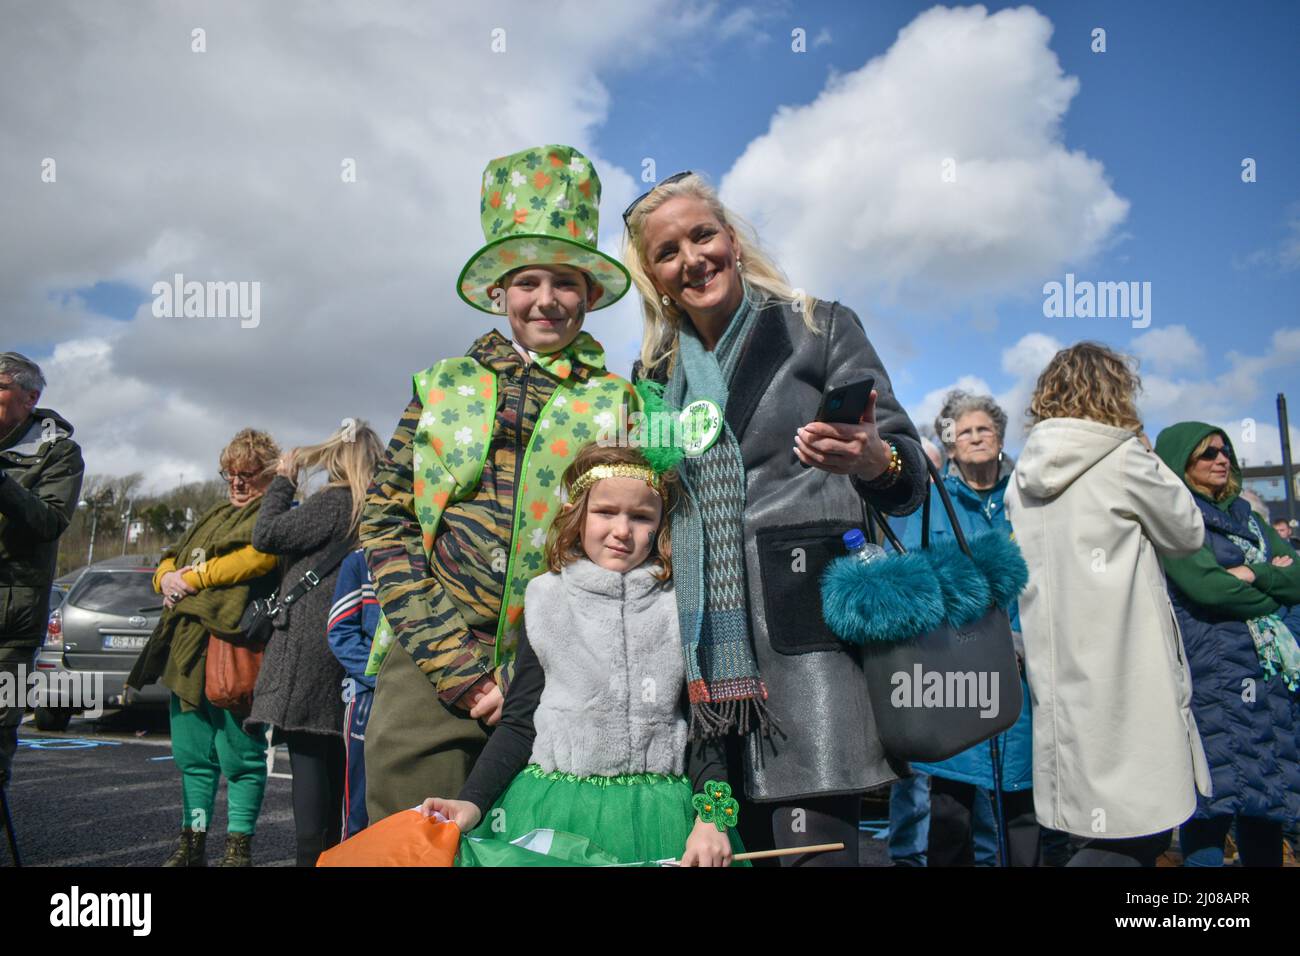 Bantry, West Cork, Ireland. 17th Mar, 2022. After a long break due to the pandemic, Saint Patrick's Day celebrations are back in full swing. A large crowd of people gathered today in the square to watch the parade and enjoy the sunny day. Pictured below: Anabelle Ruban, with her mom, Mairead Ruban, and brother Joseph. Credit: Karlis Dzjamko/Alamy Live News Stock Photo